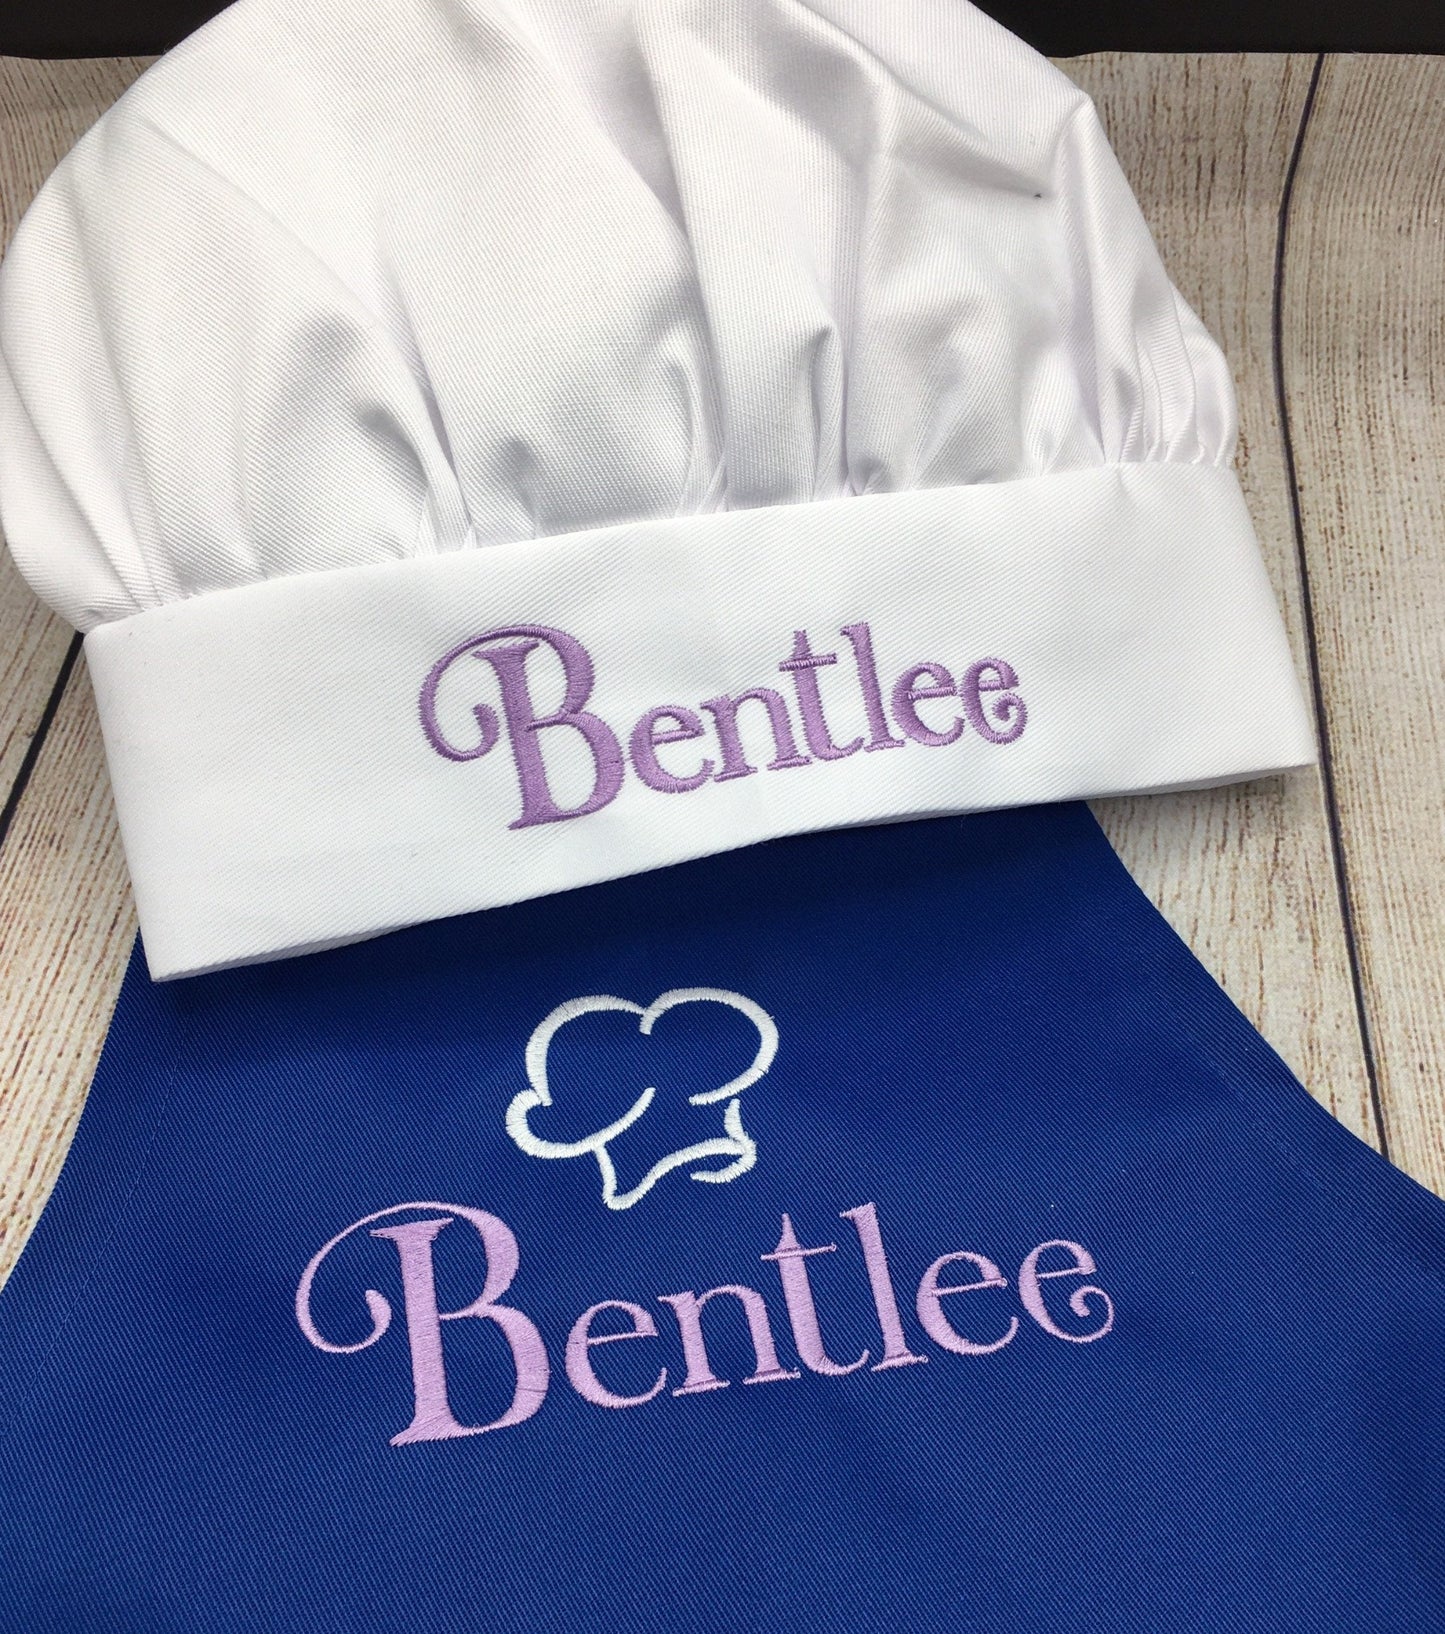 Child's royal blue apron and white chefs hat with embroidered name